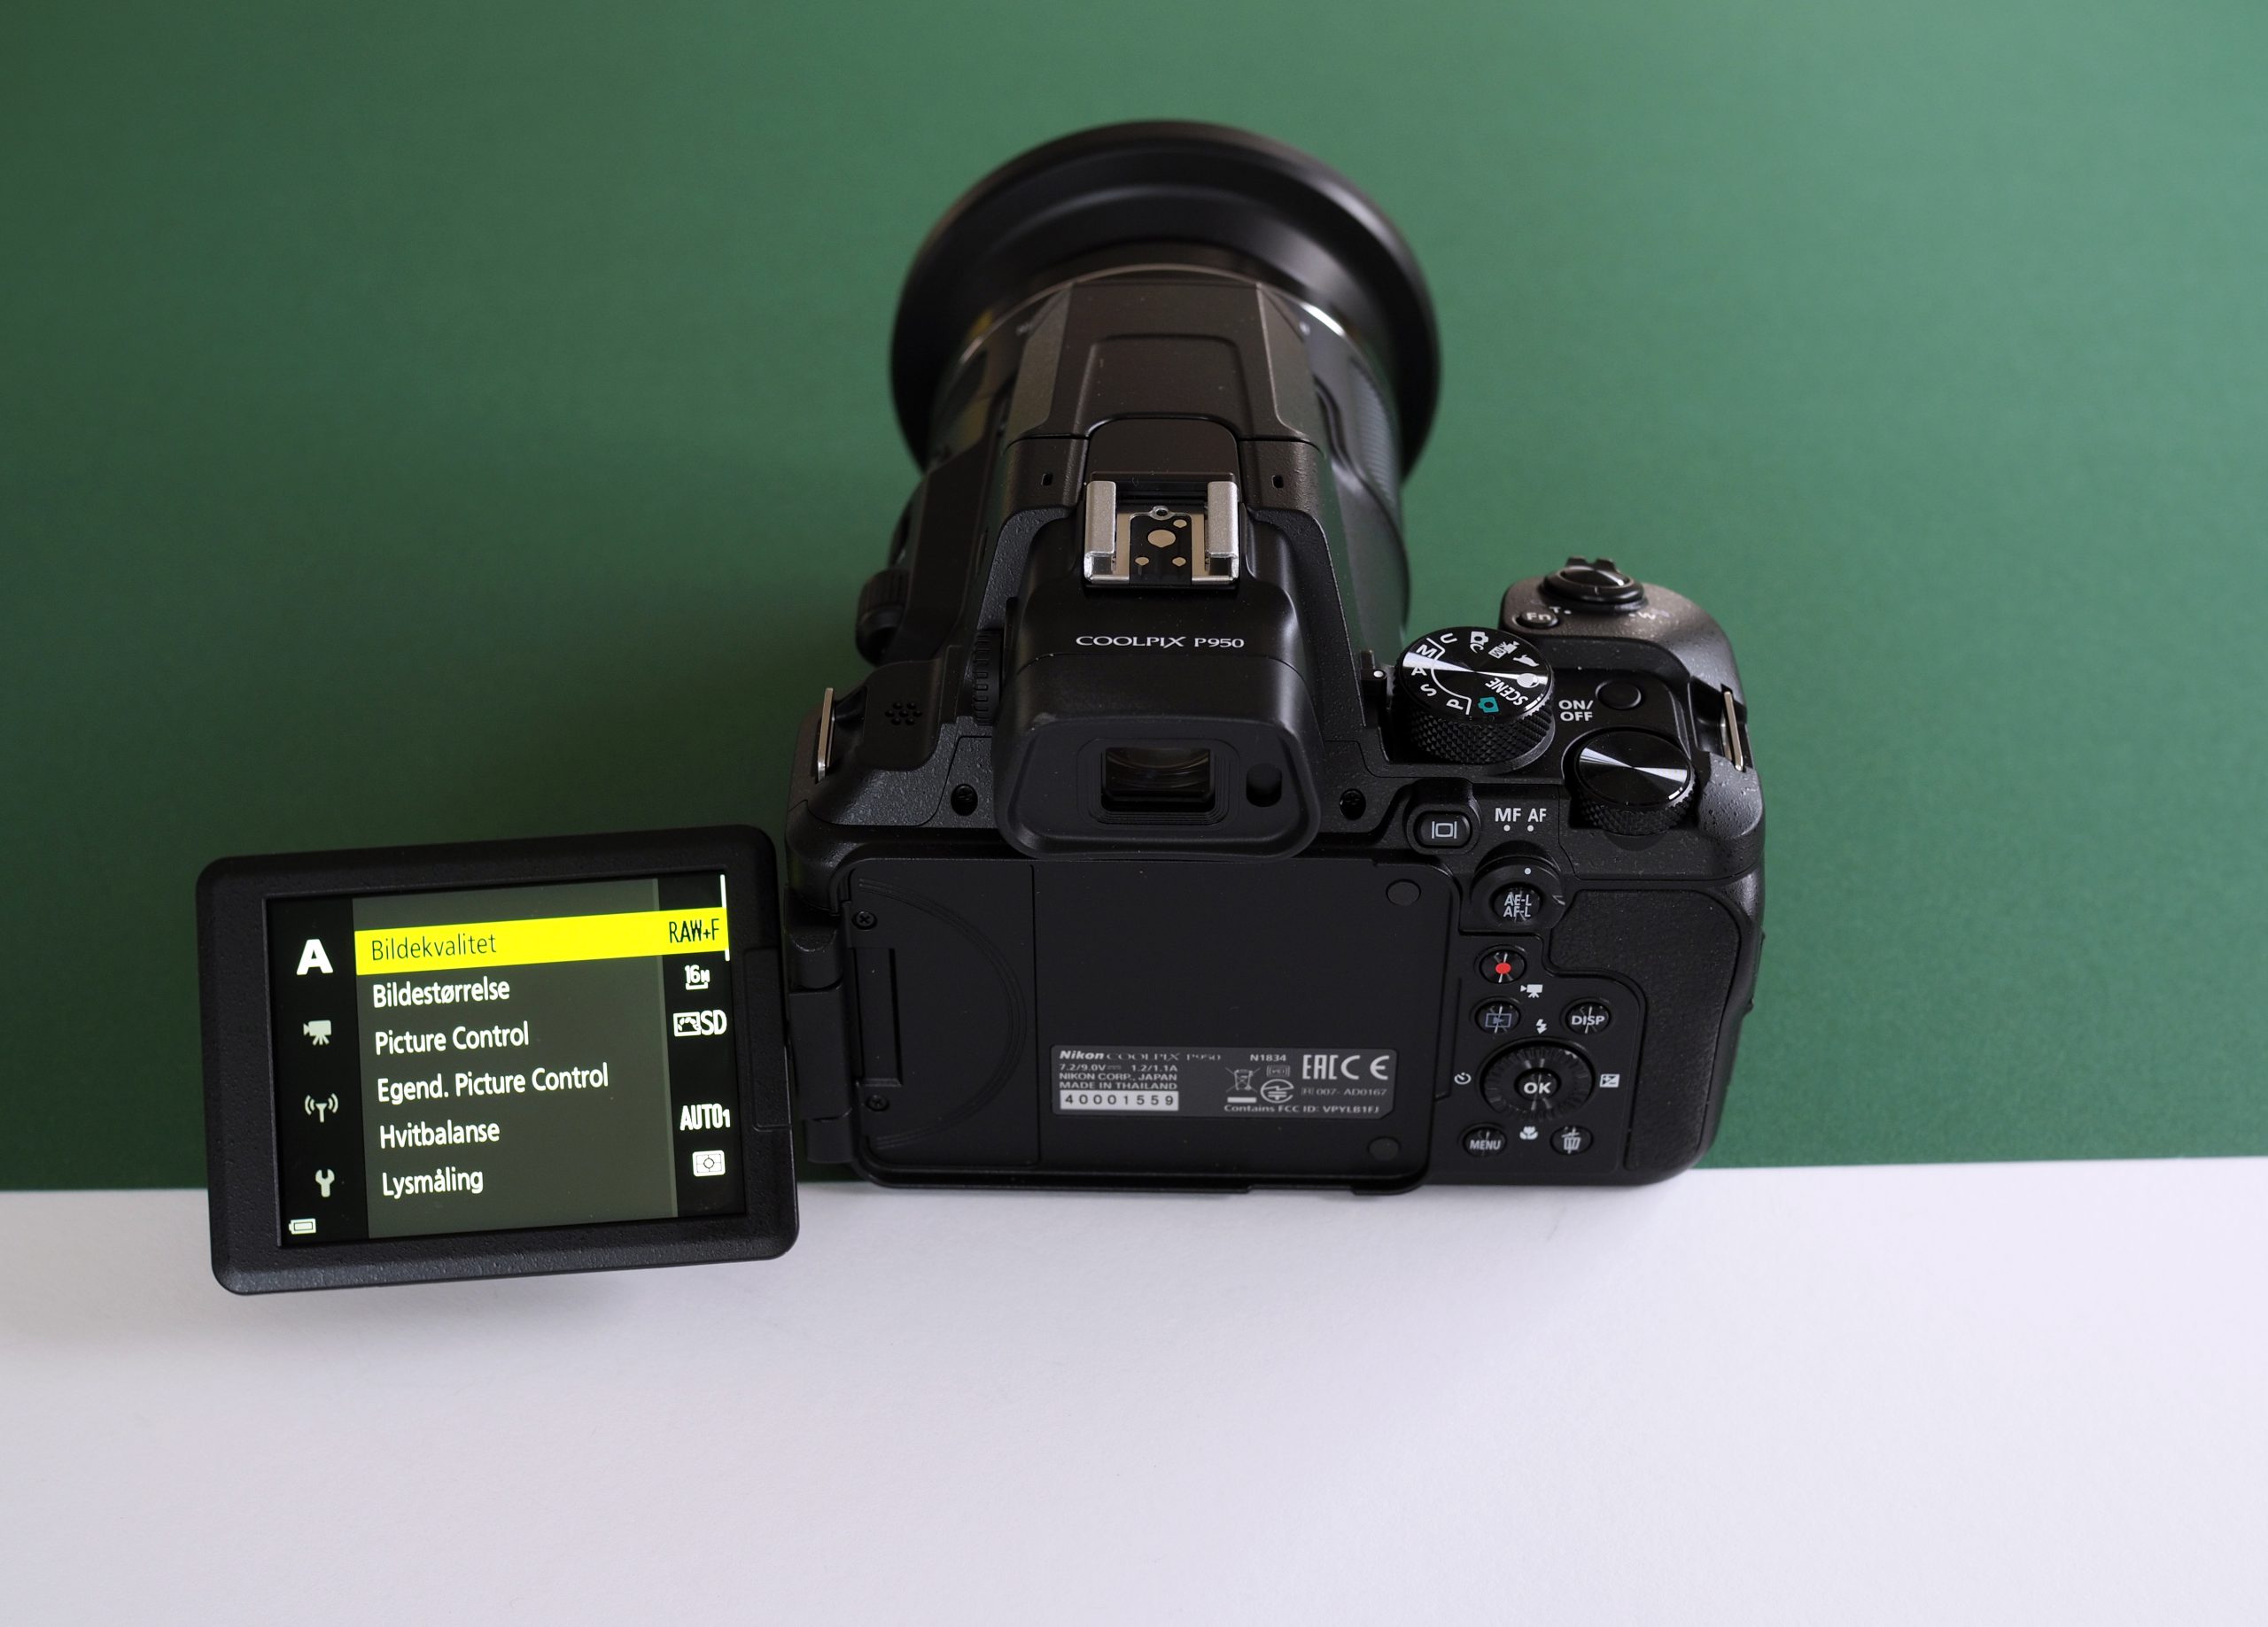 Review: Nikon Coolpix P950 | Extreme Zoom For Extreme Images